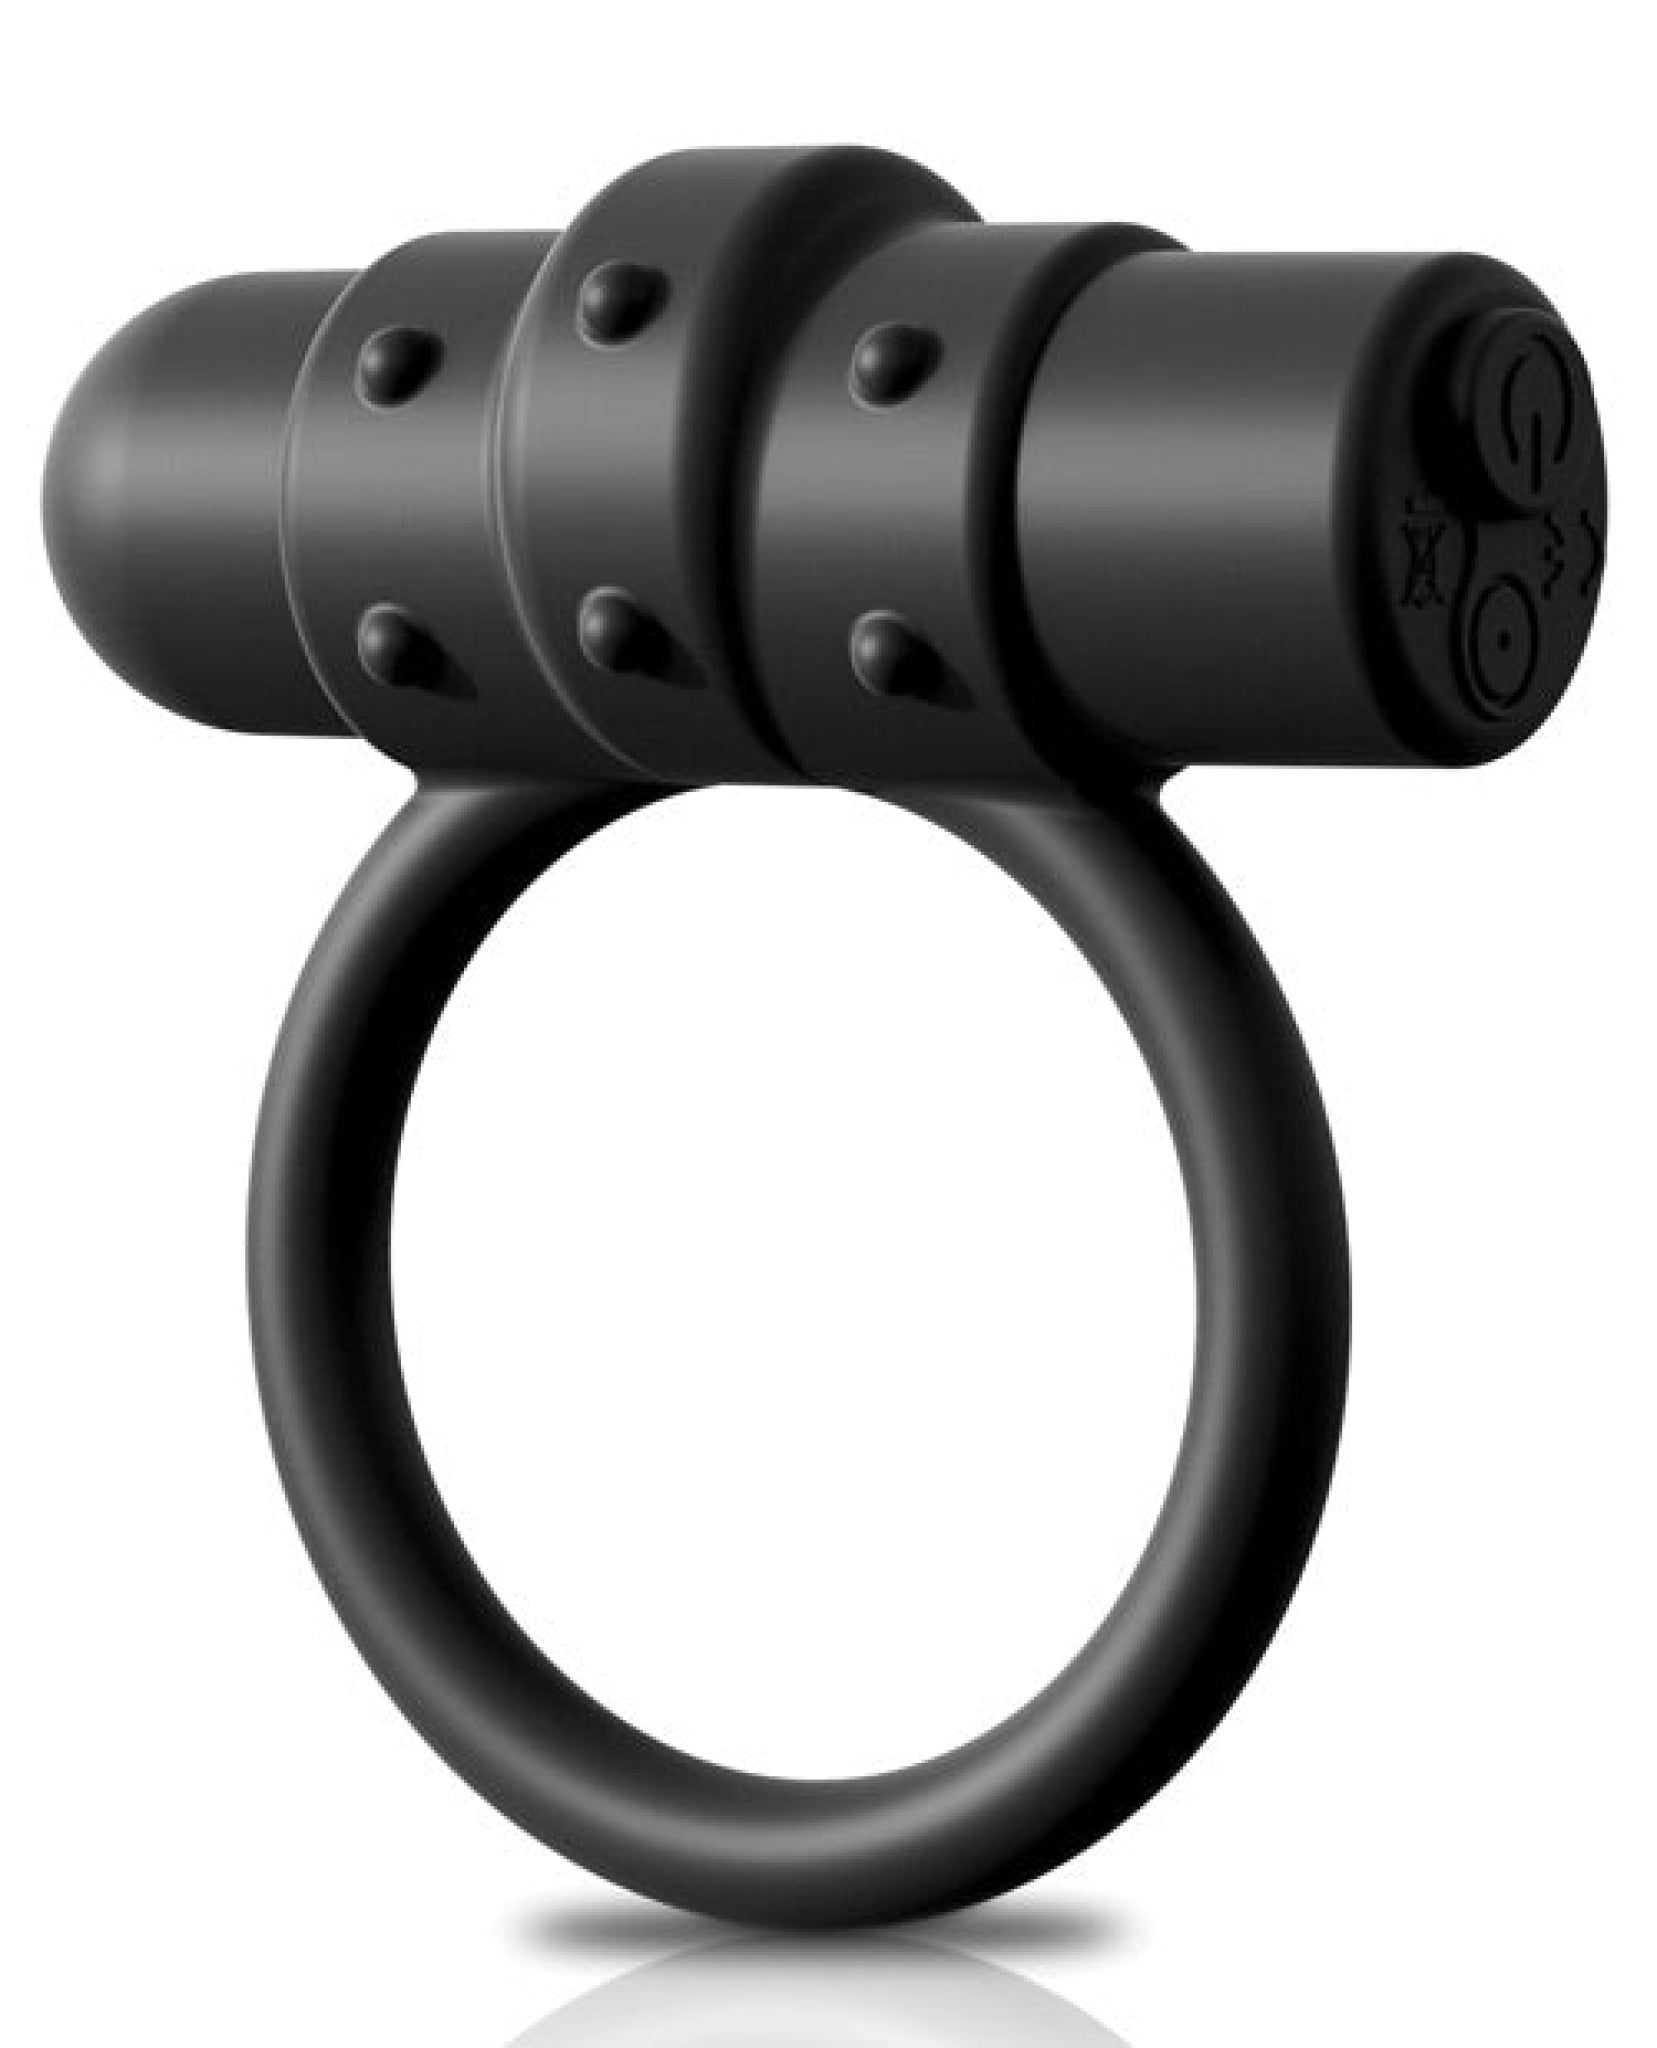 Sir Richards Control Vibrating Silicone C-ring - Black Pipedream®